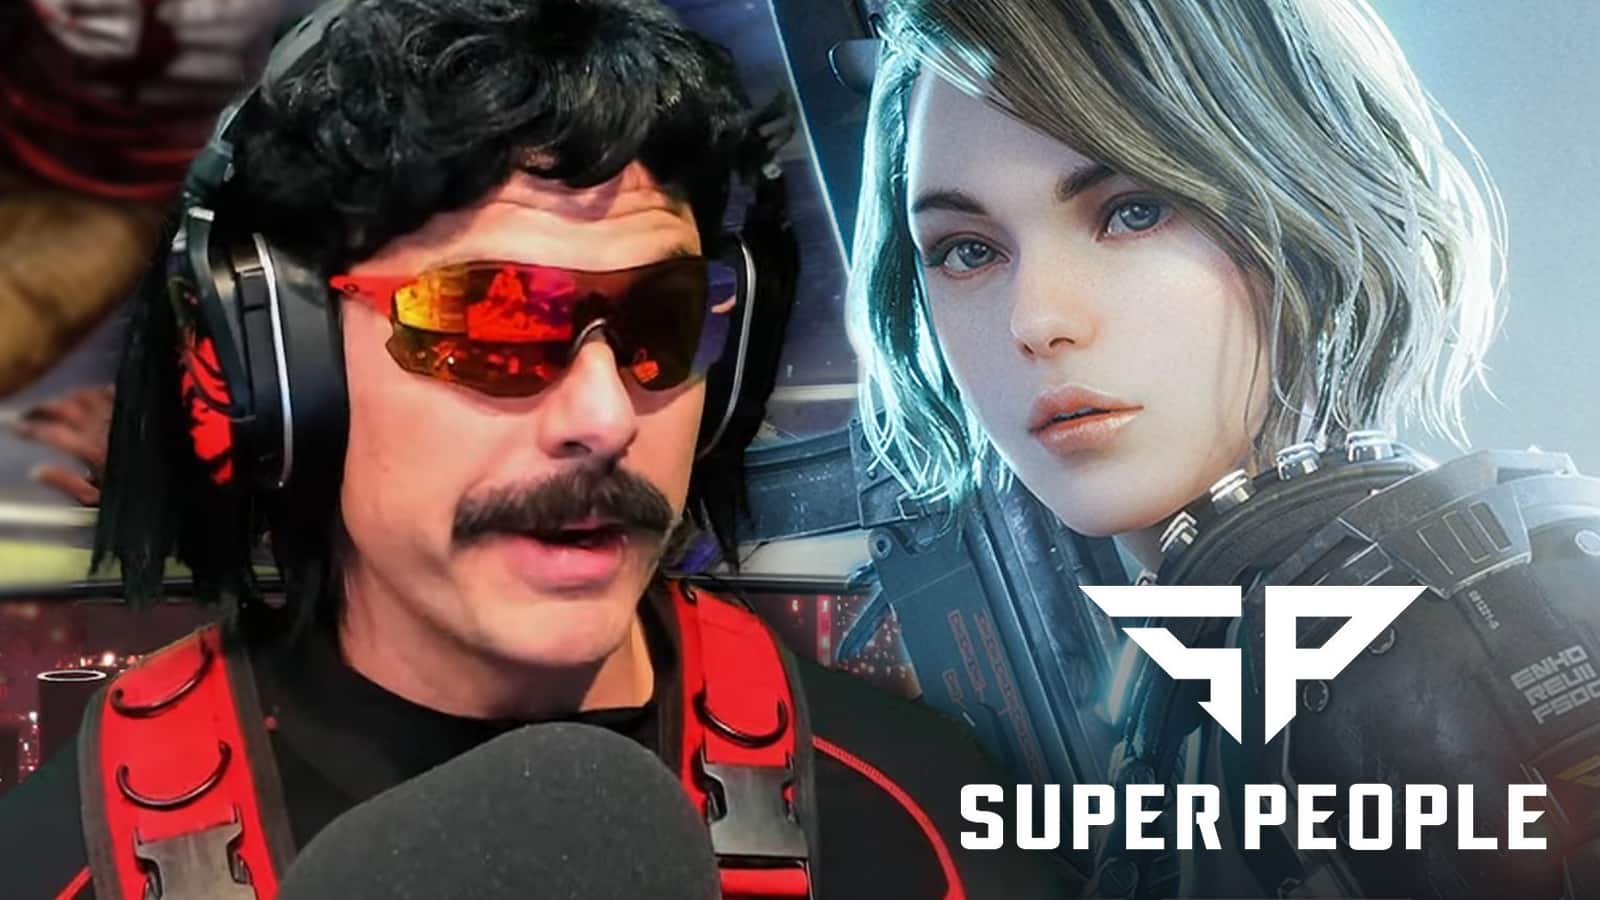 Dr Disrespect wowed by Super People battle royale.